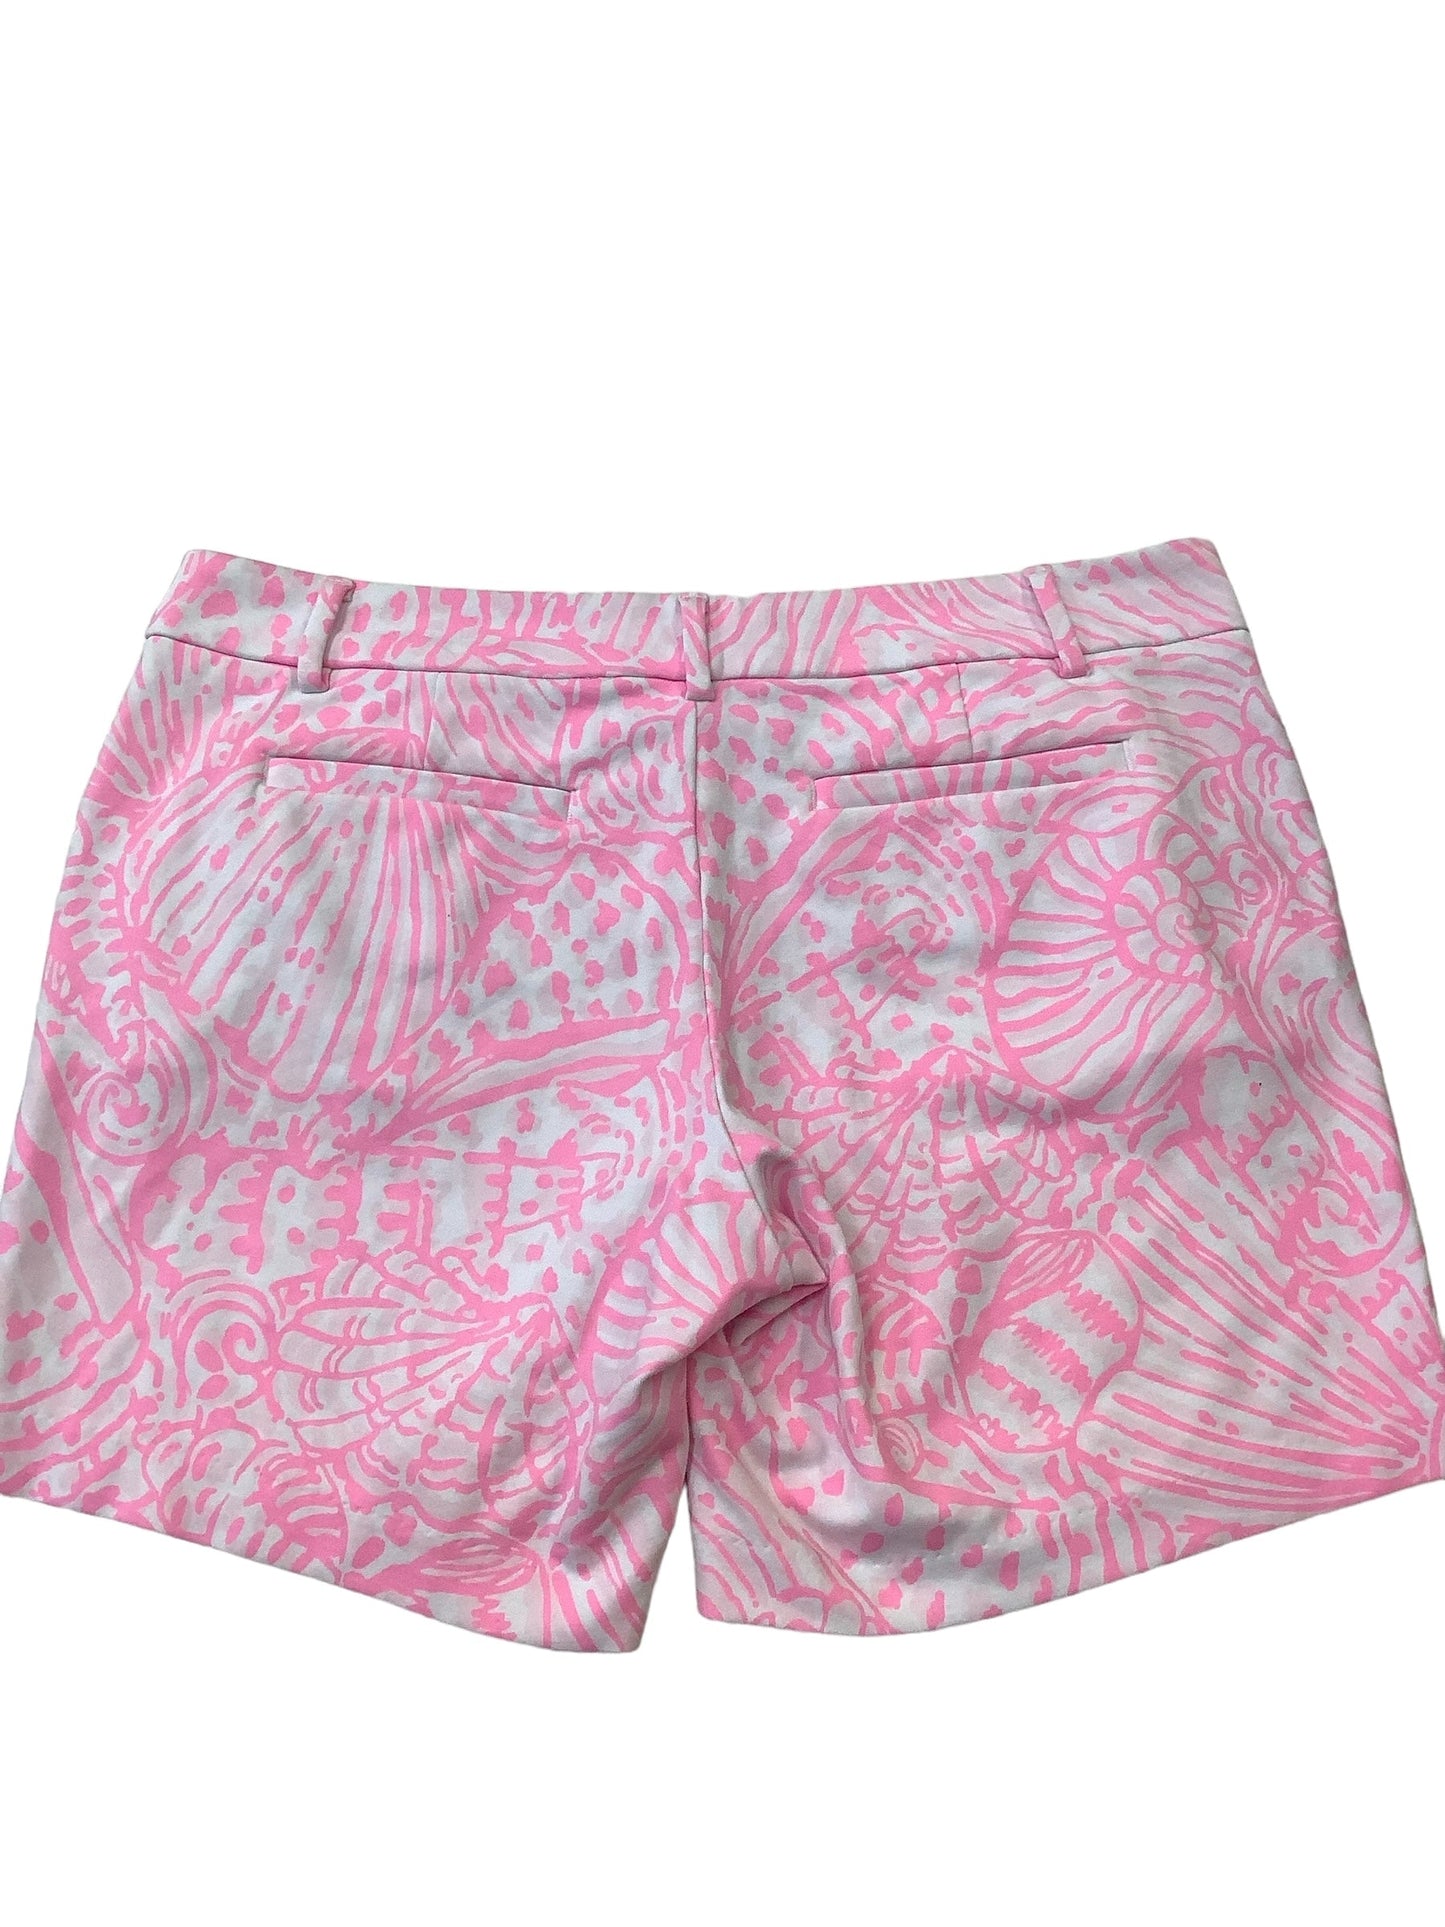 Pink Shorts Lilly Pulitzer, Size 10